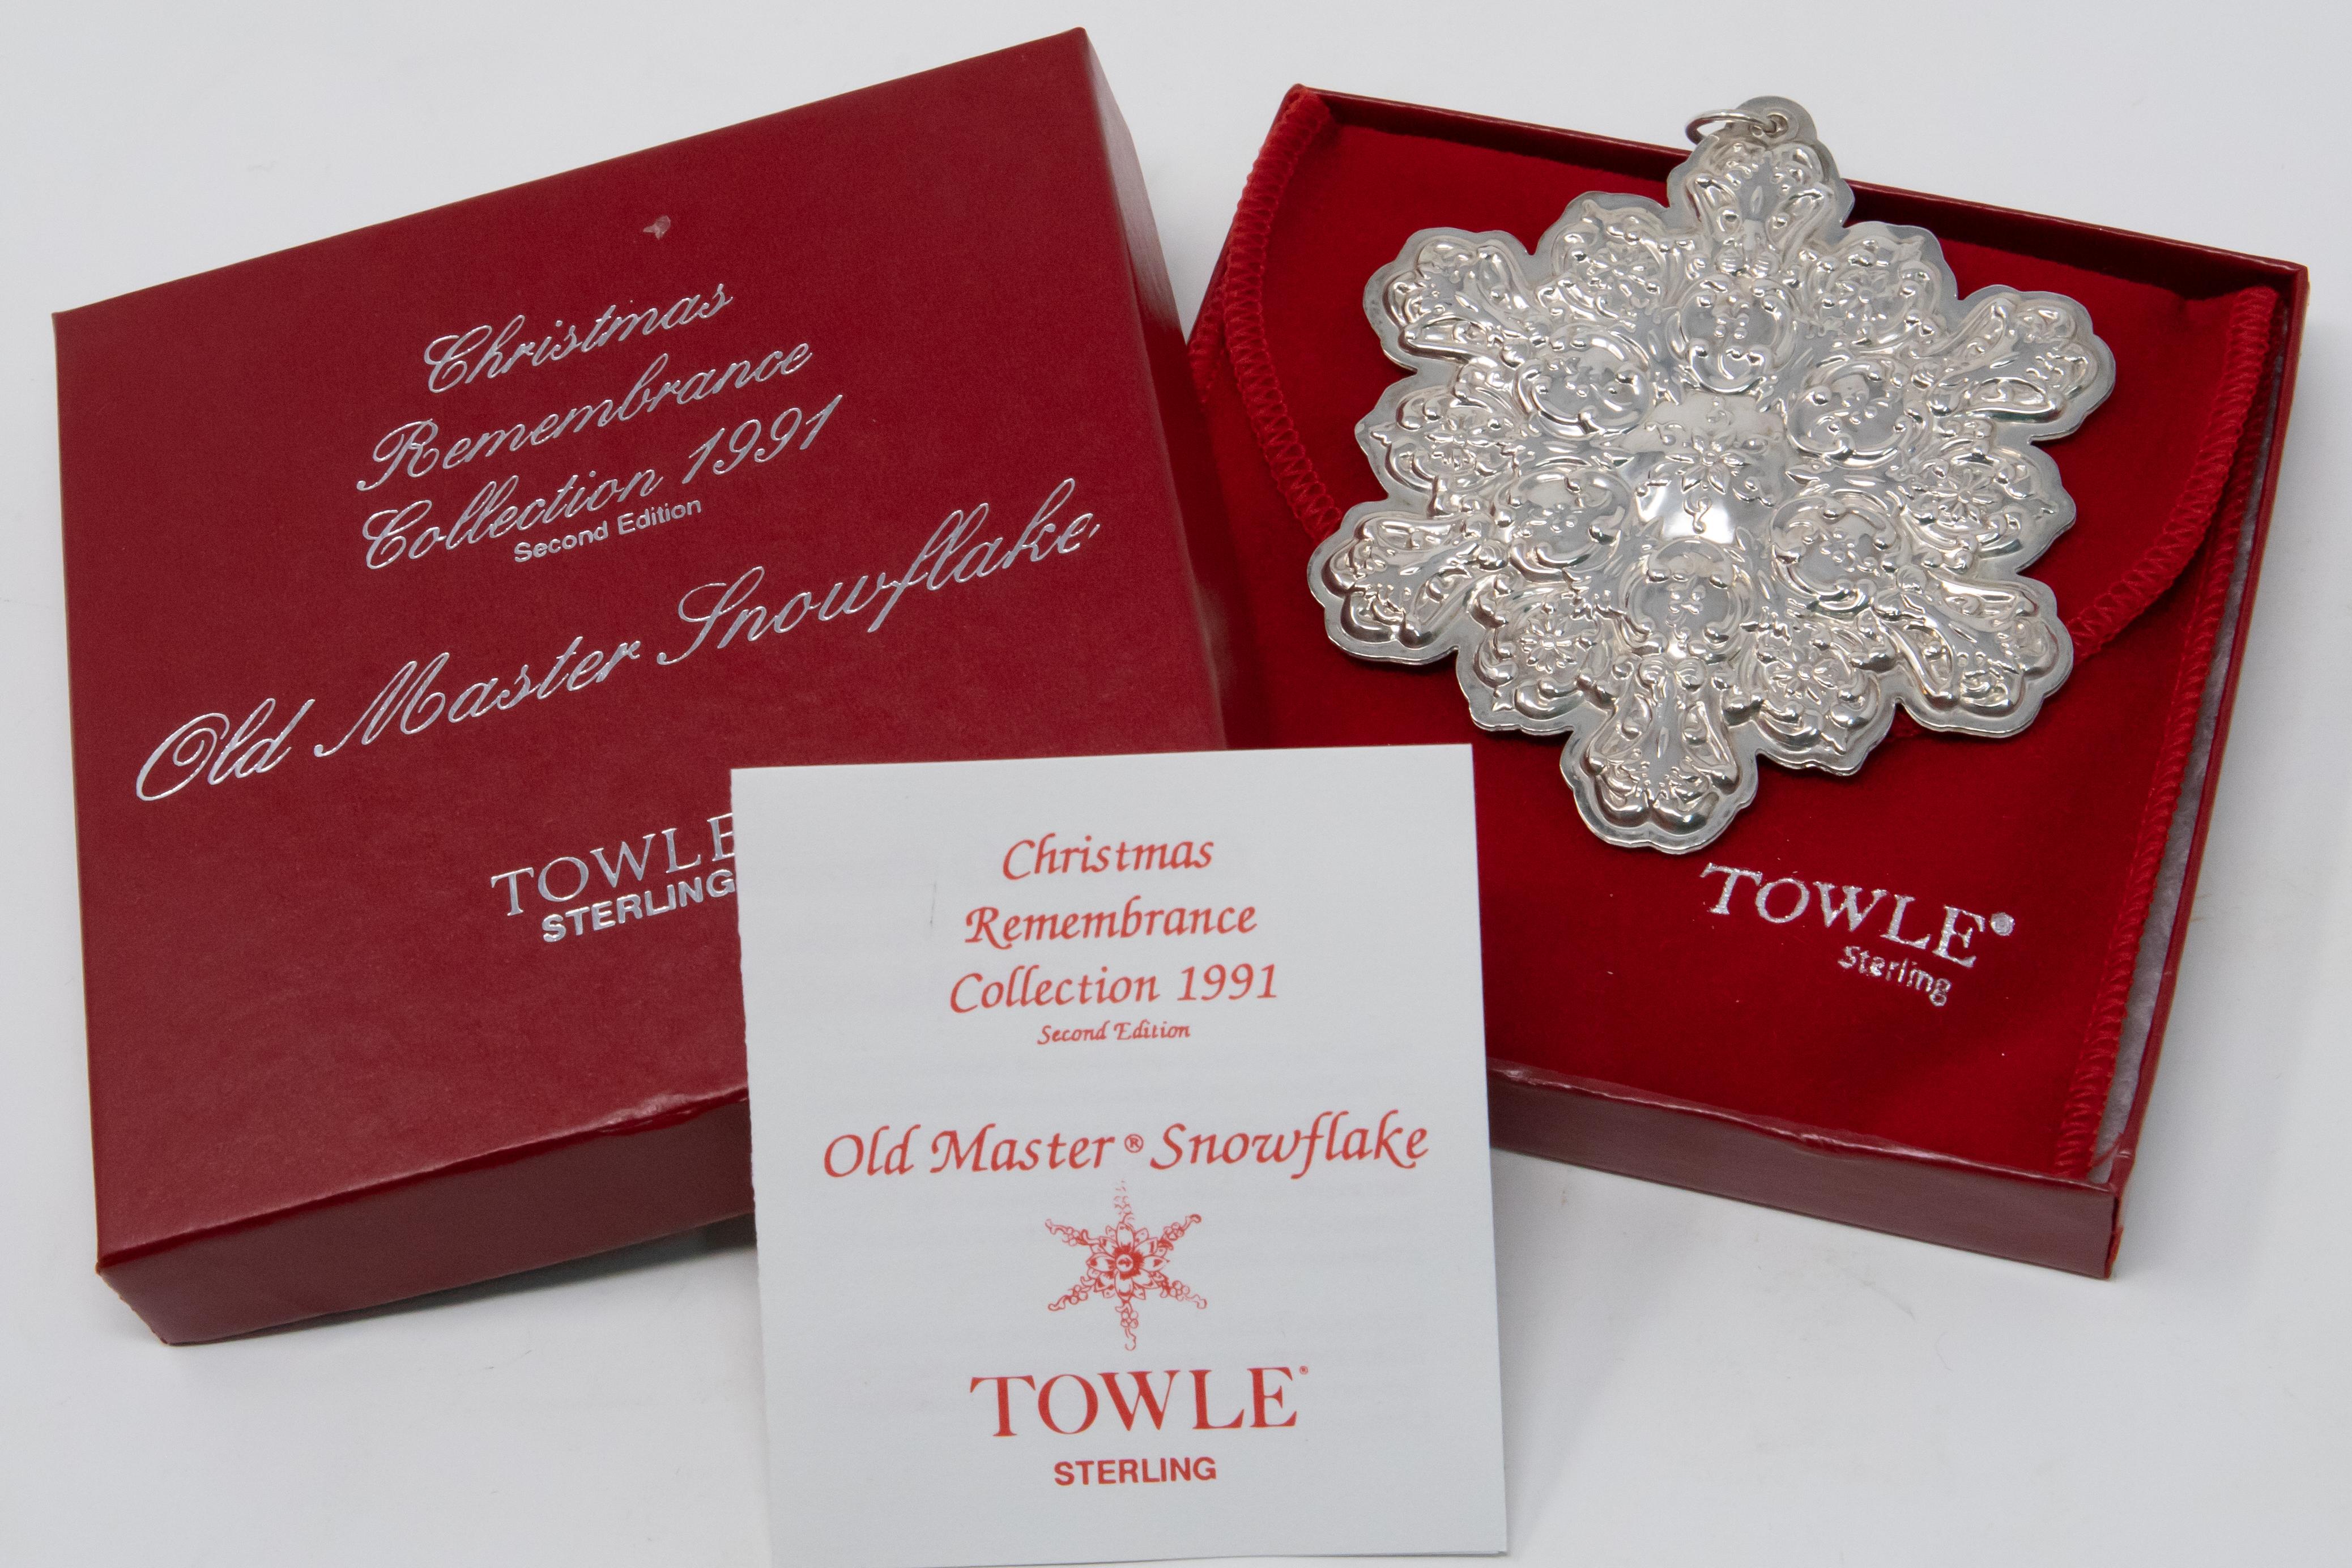 Offering this stunning Towle old master snowflake from 1991. The front is all foliate, and scrollwork designs with lots of texture. The center is inscribed with Towle Sterling, 1991. Come with original box and paperwork.